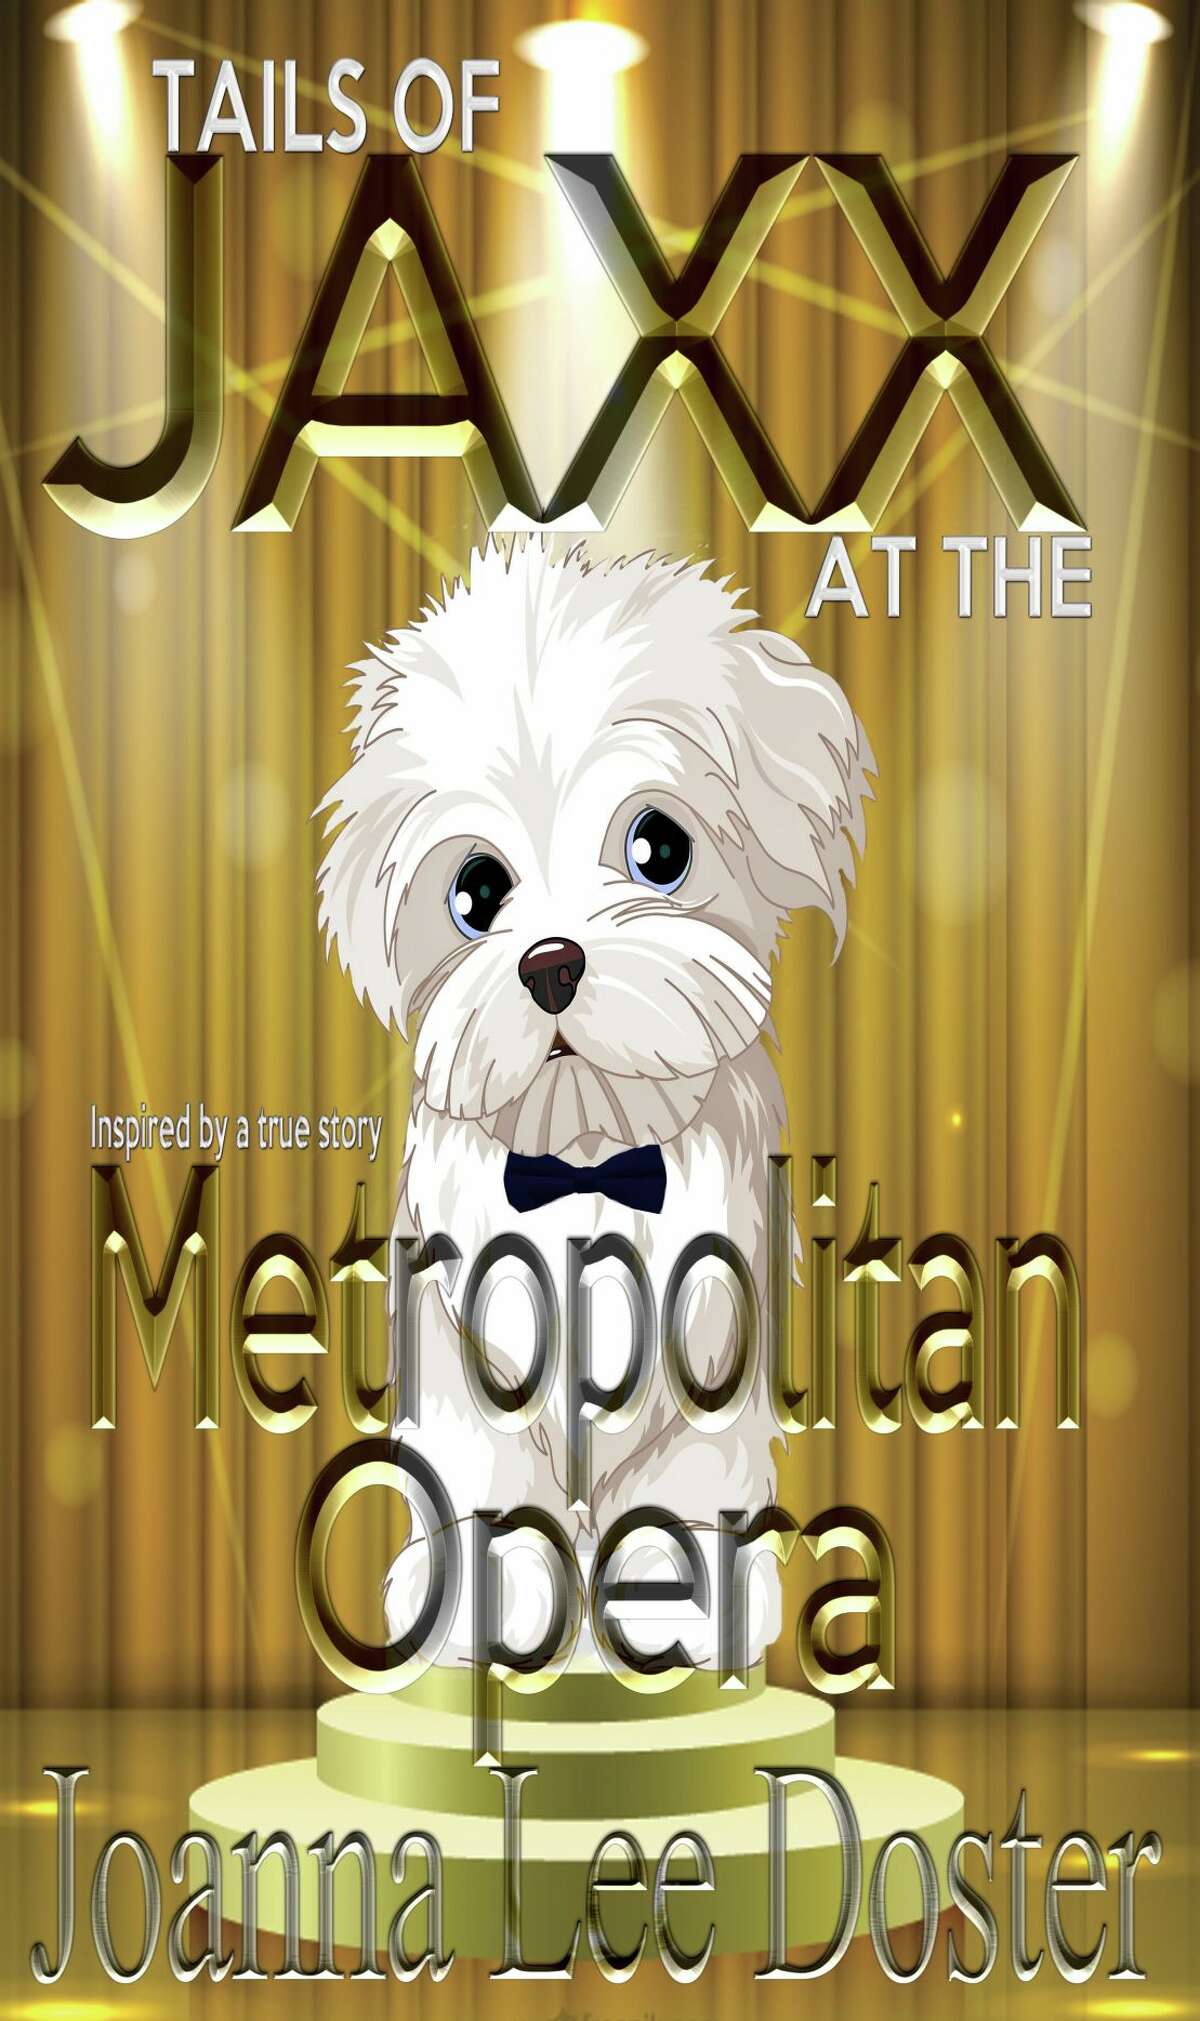 Author Joanna Lee Doster's children's books are based on her dog, Jumping Jack Flash, who appeared in Metropolitan Opera productions in New York City. Her first book was“Tails of Jaxx at the Metropolitan Opera.”